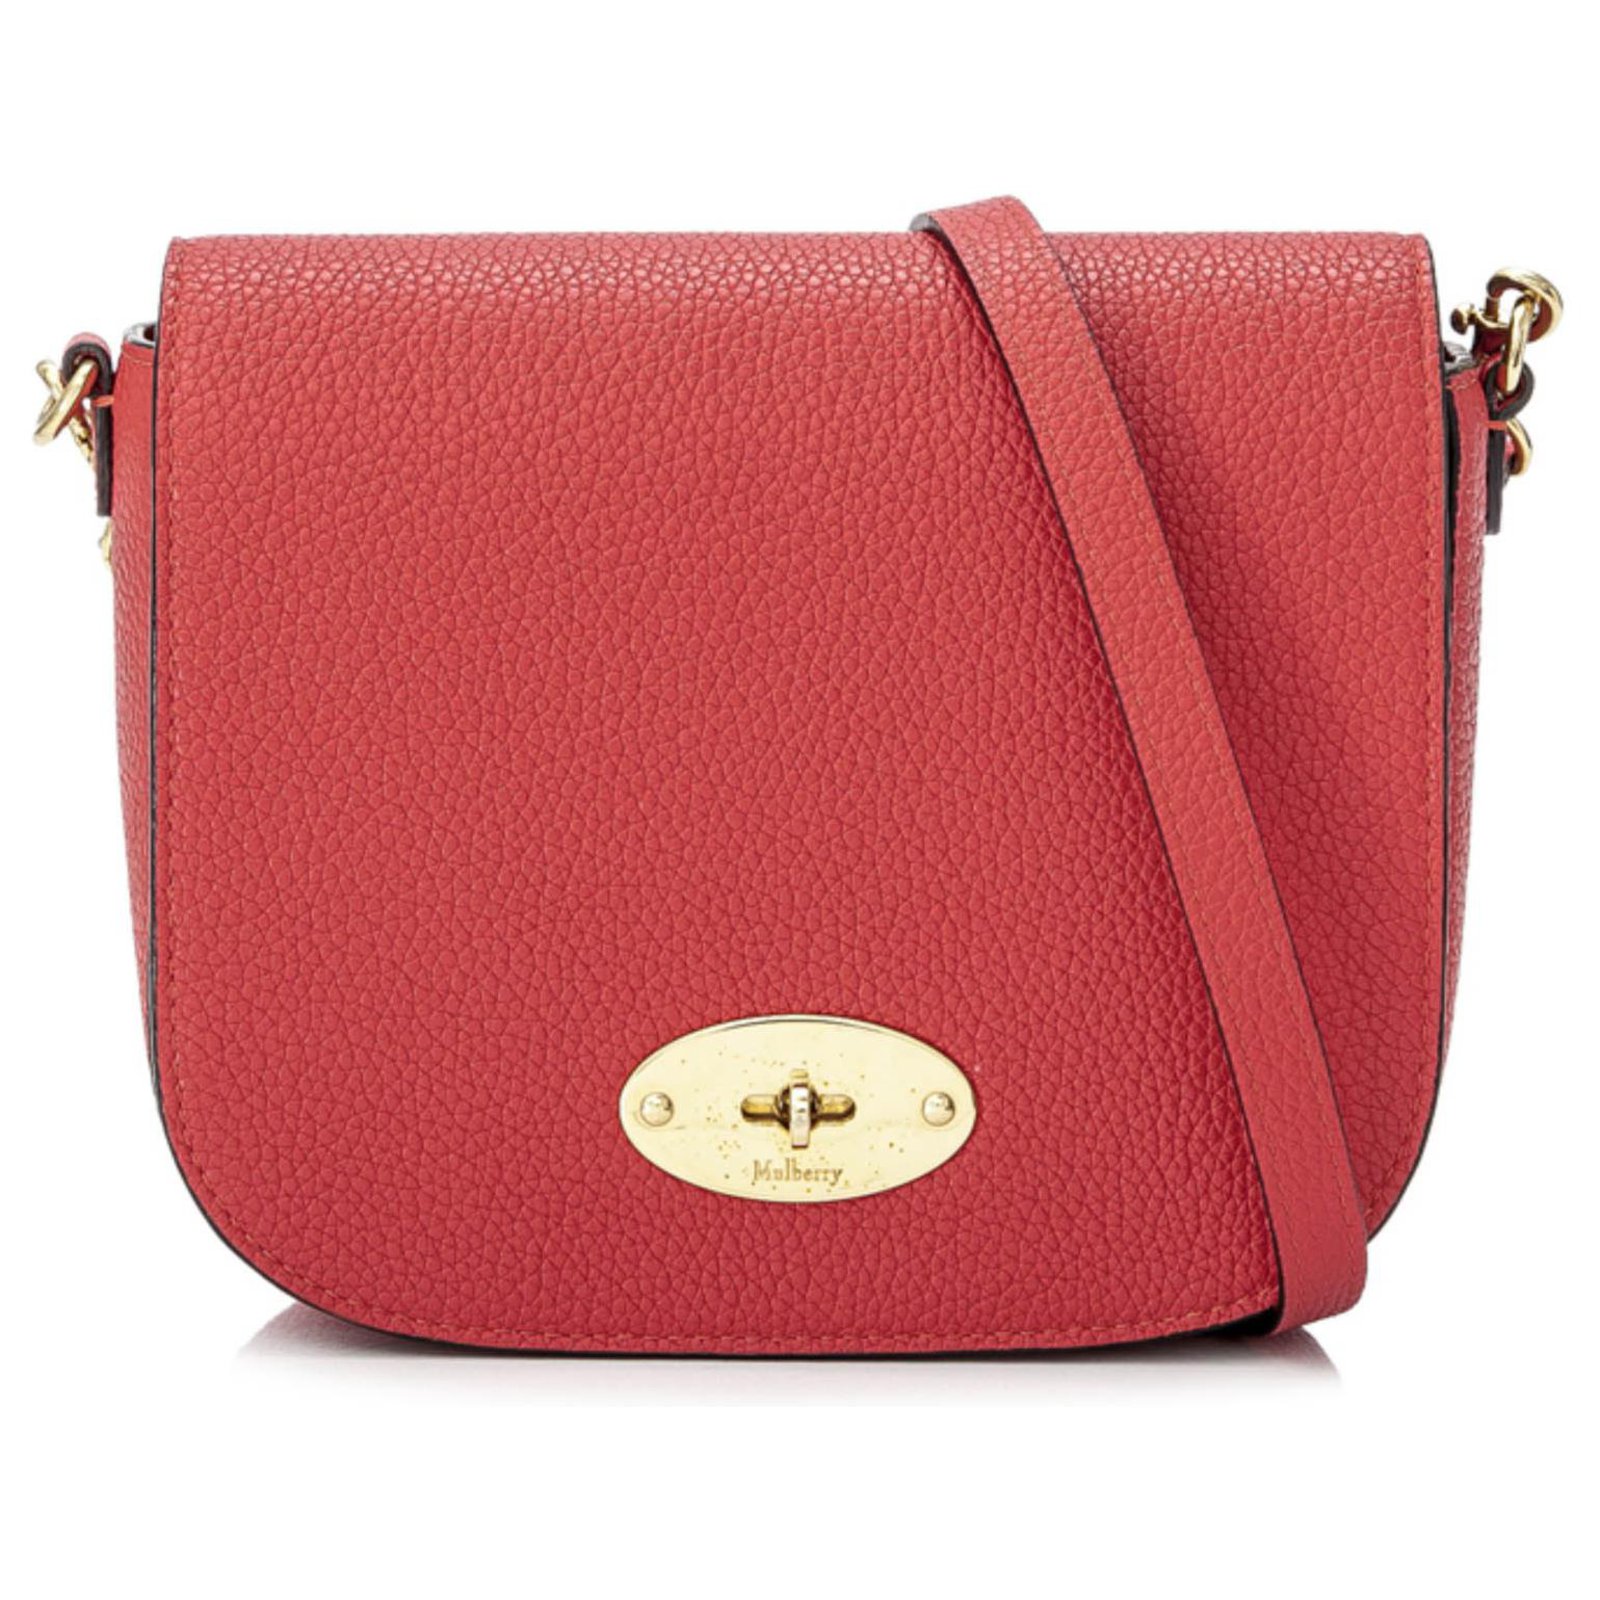 Mulberry Red Small Darley Leather Crossbody Bag Pony-style